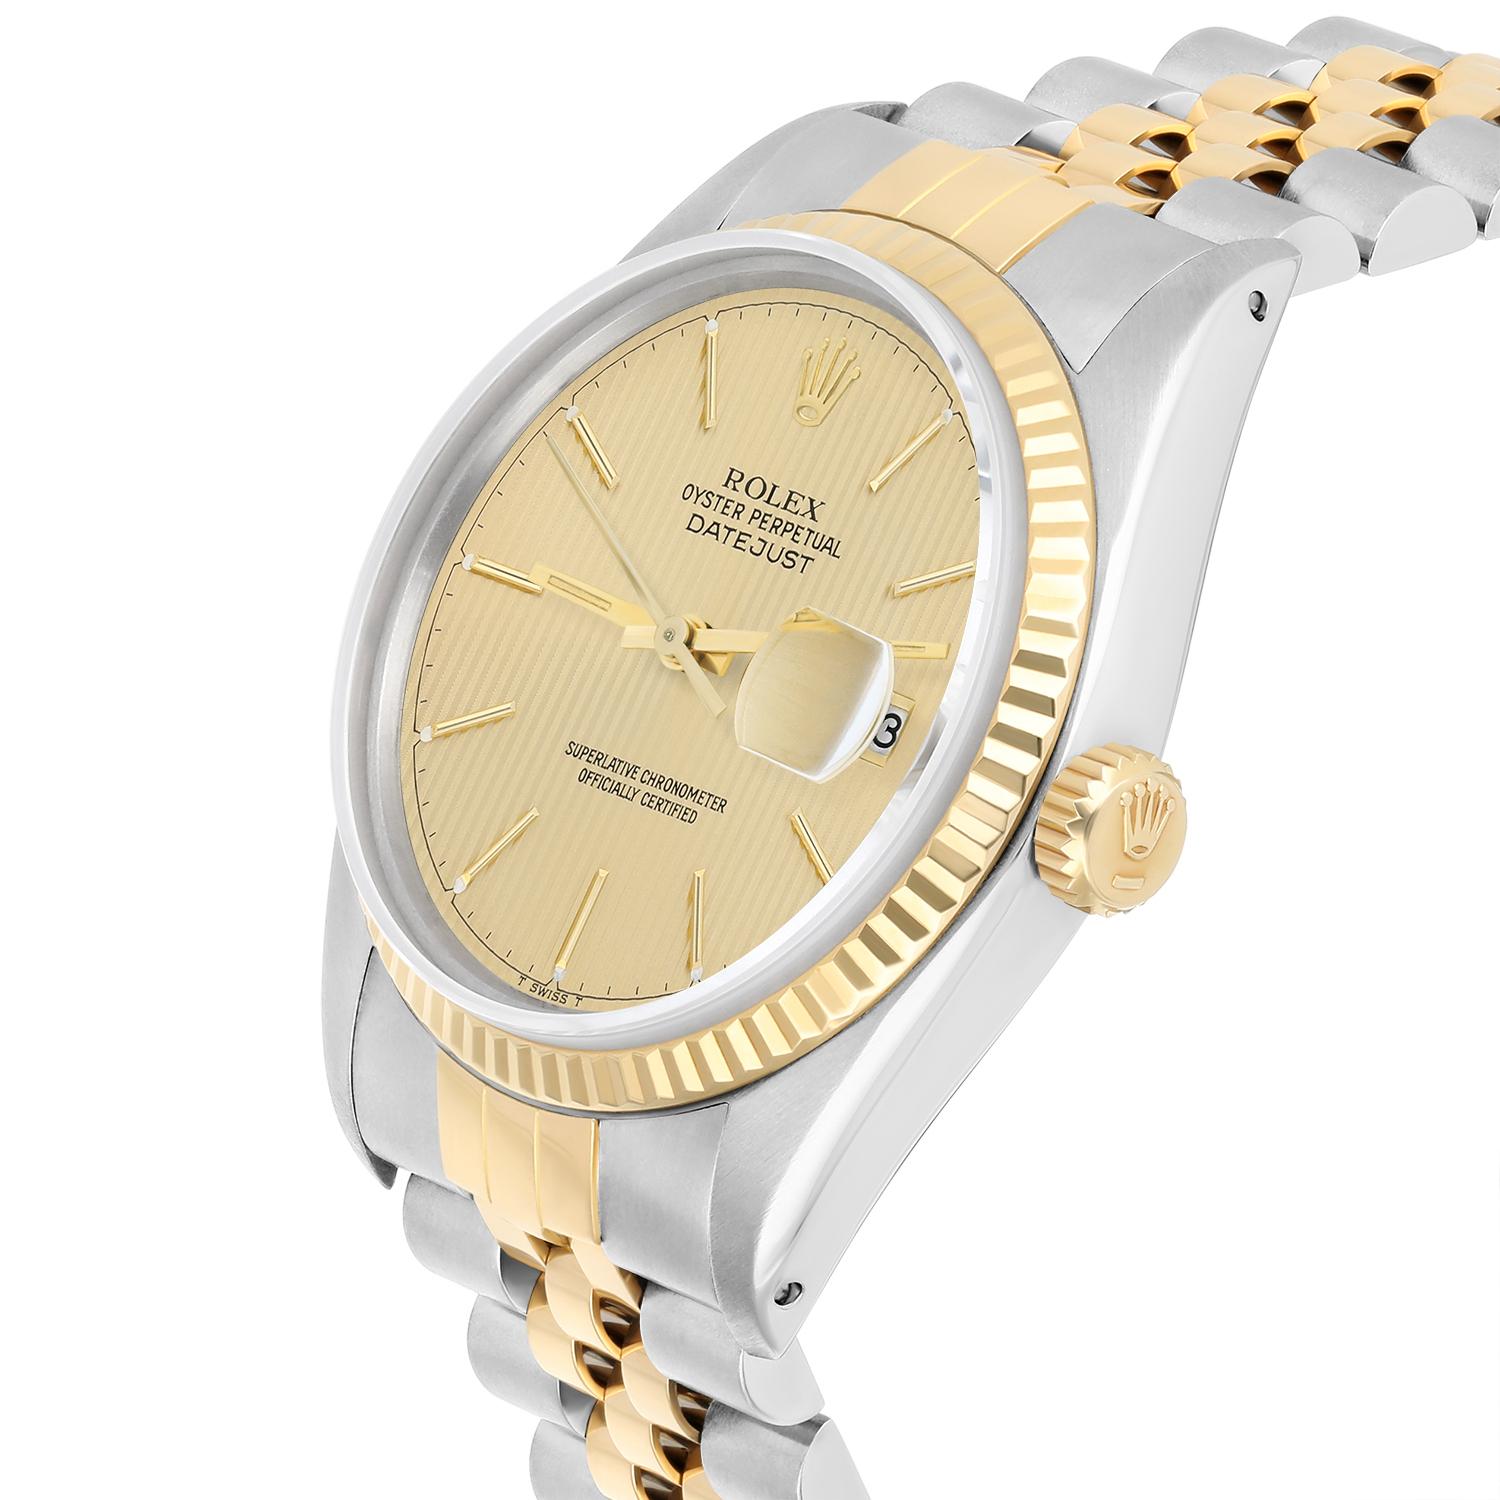 Rolex Datejust 36mm Two Tone Champagne Dial Jubilee 16013 Circa 1988 Papers For Sale 1